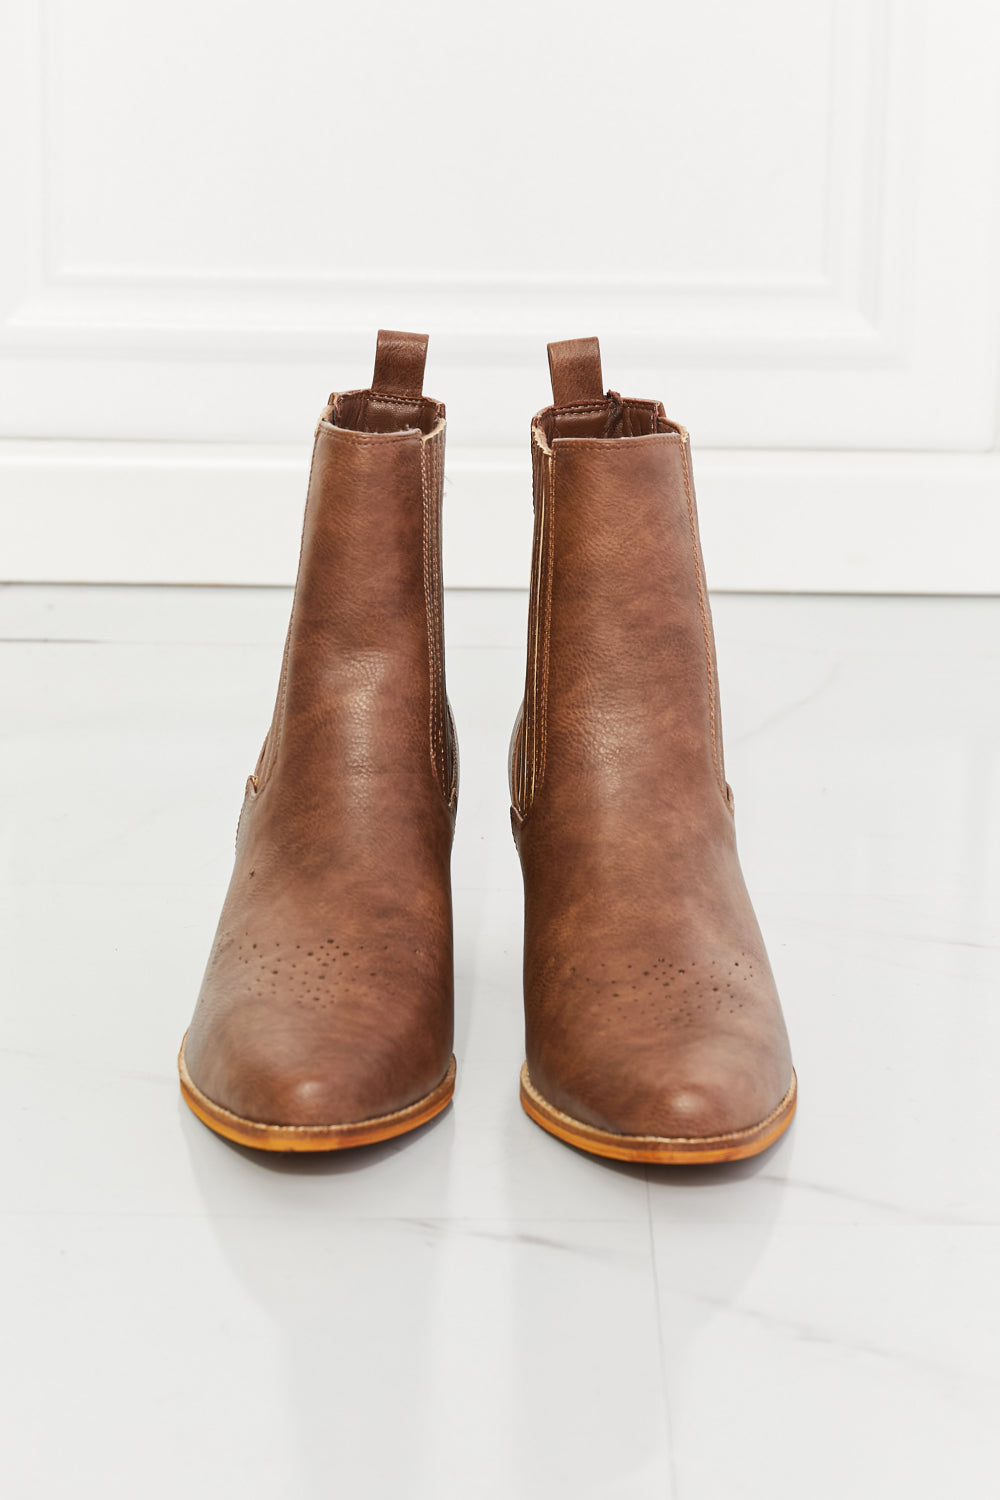 MMShoes Stacked Heel Cowboy Style Chelsea Ankle Bootie Boots in Chestnut Brown Love the Journey